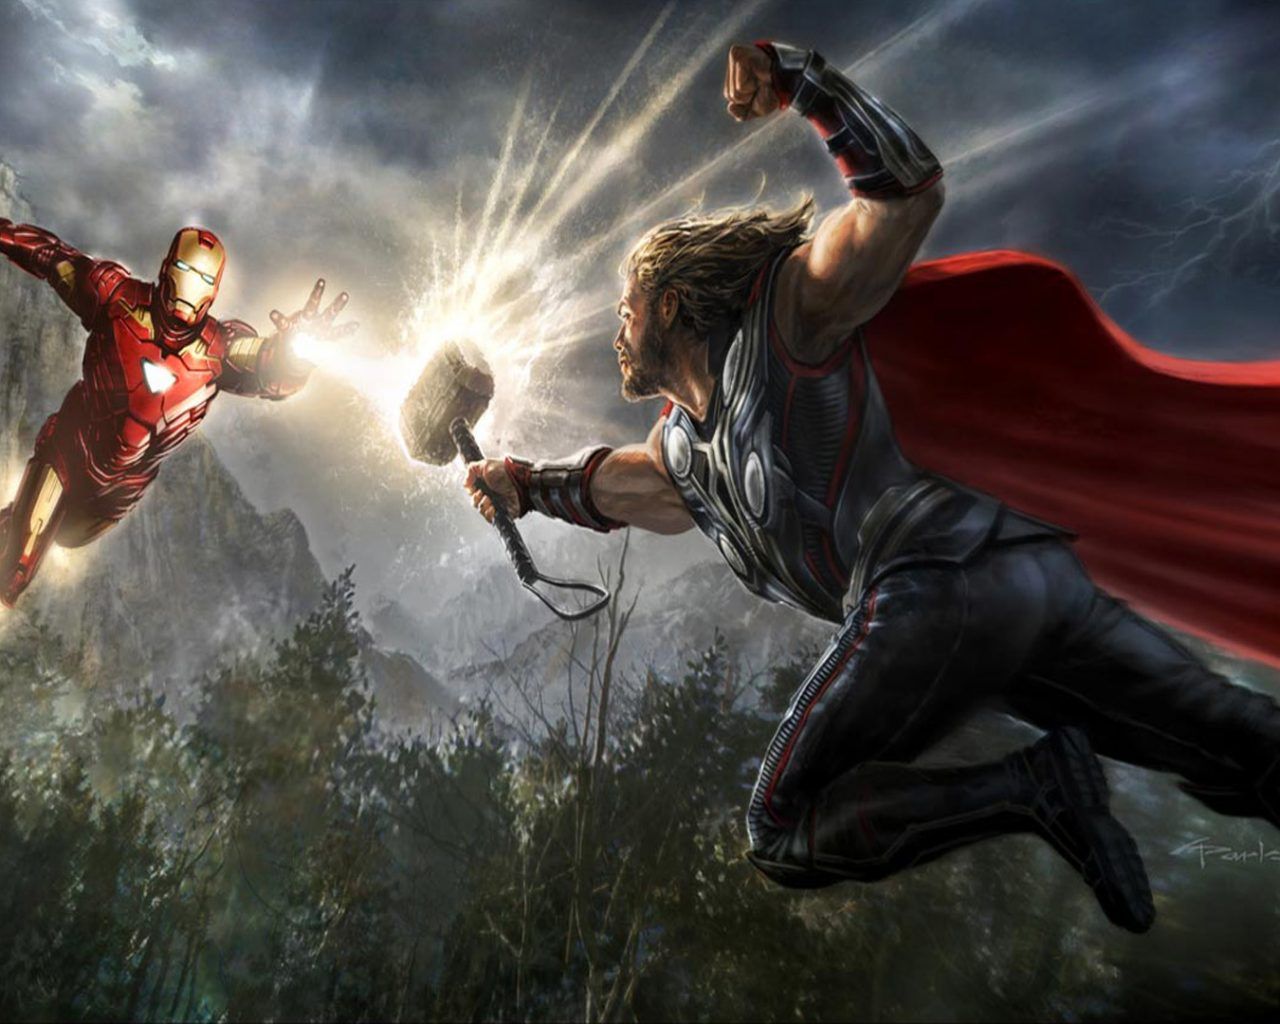 Thor And Iron Man The Avengers Marvel Movies Full HD Wallpaper1920x1080, Wallpaper13.com